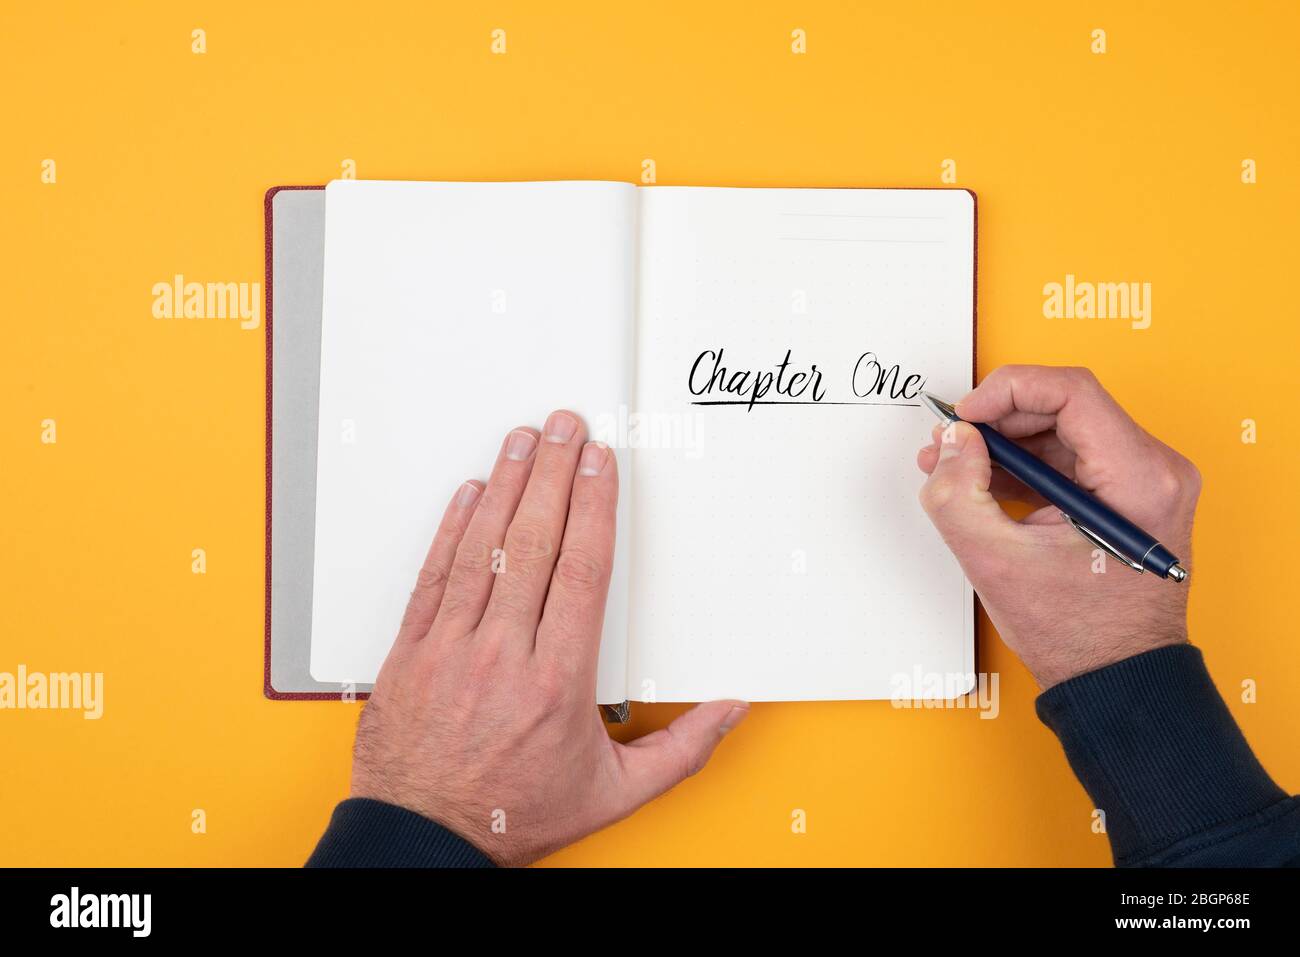 top view of person writing words CHAPTER ONE on note pad against orange background Stock Photo